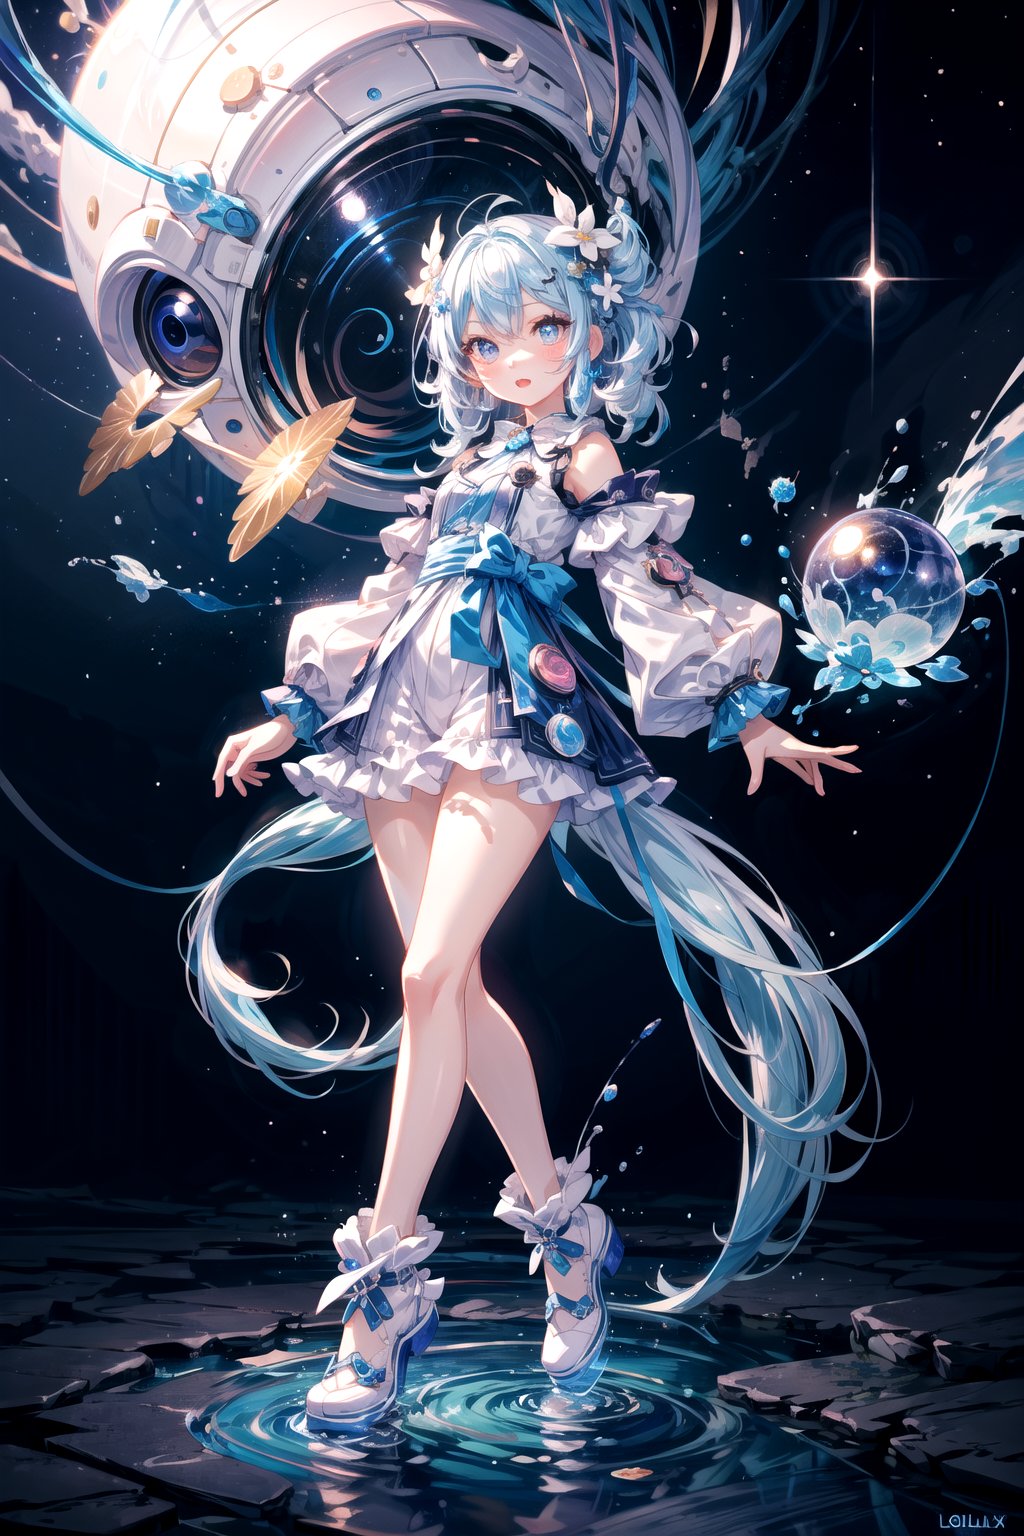 masterpiece,  extremely detailed, highest quality, girl, full body, beautiful shining eyes, cute expression, white and blue hair, alien planet, lolipop in hand, dynamic lighting, sharp ,no_humans,EnvyBeautyMix23, night time